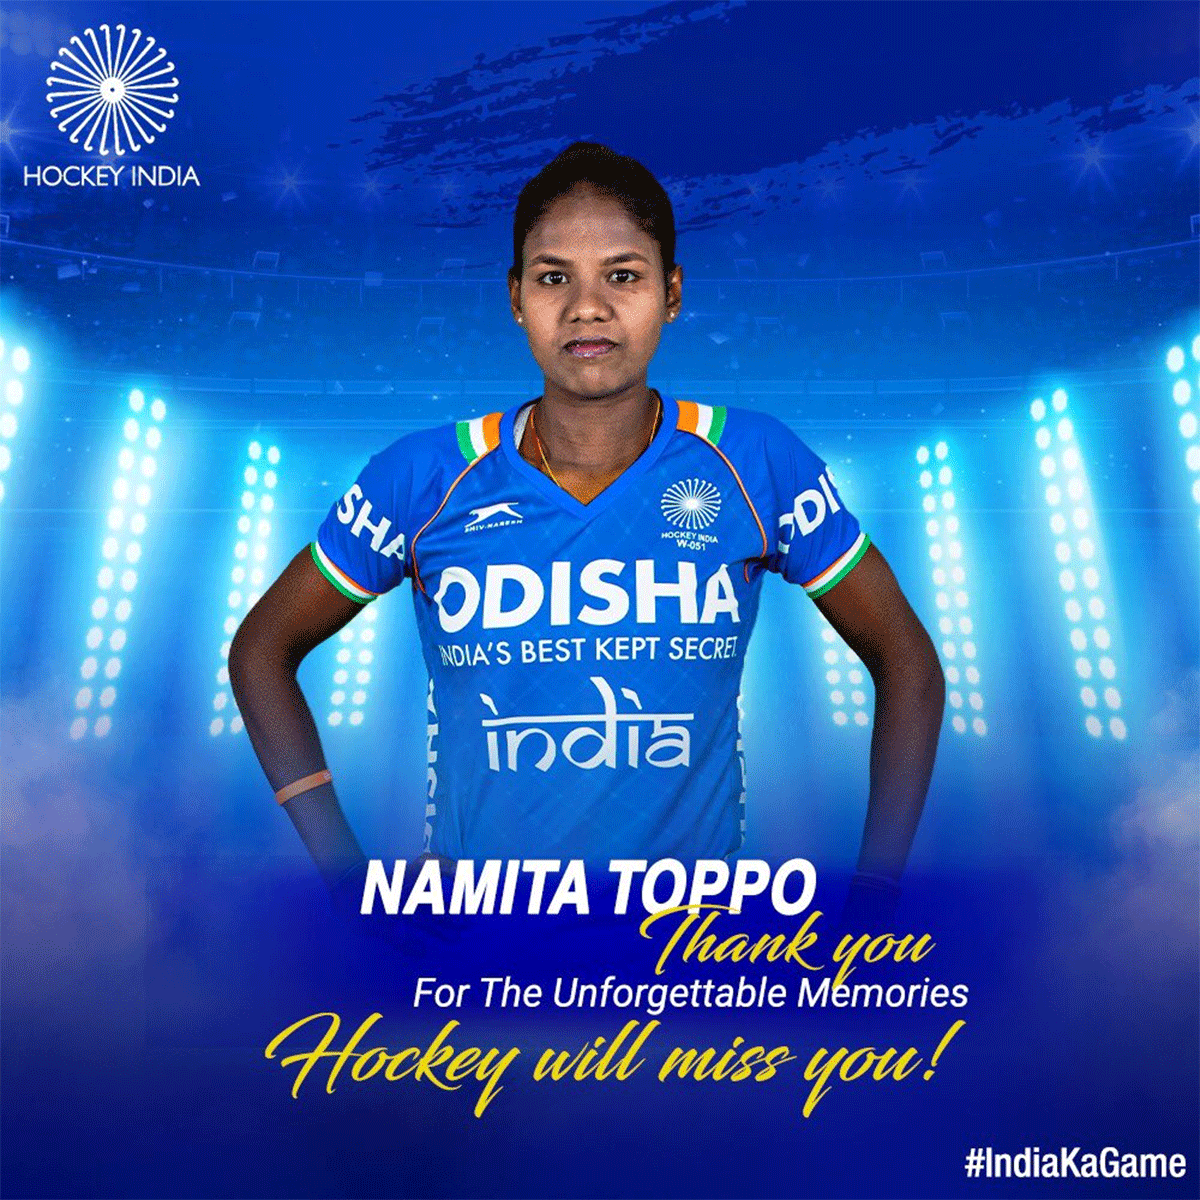 Namita Toppo part of the 2014 Commonwealth Games, 2014 Asian Games where India won a bronze and the 2016 Rio Olympics.